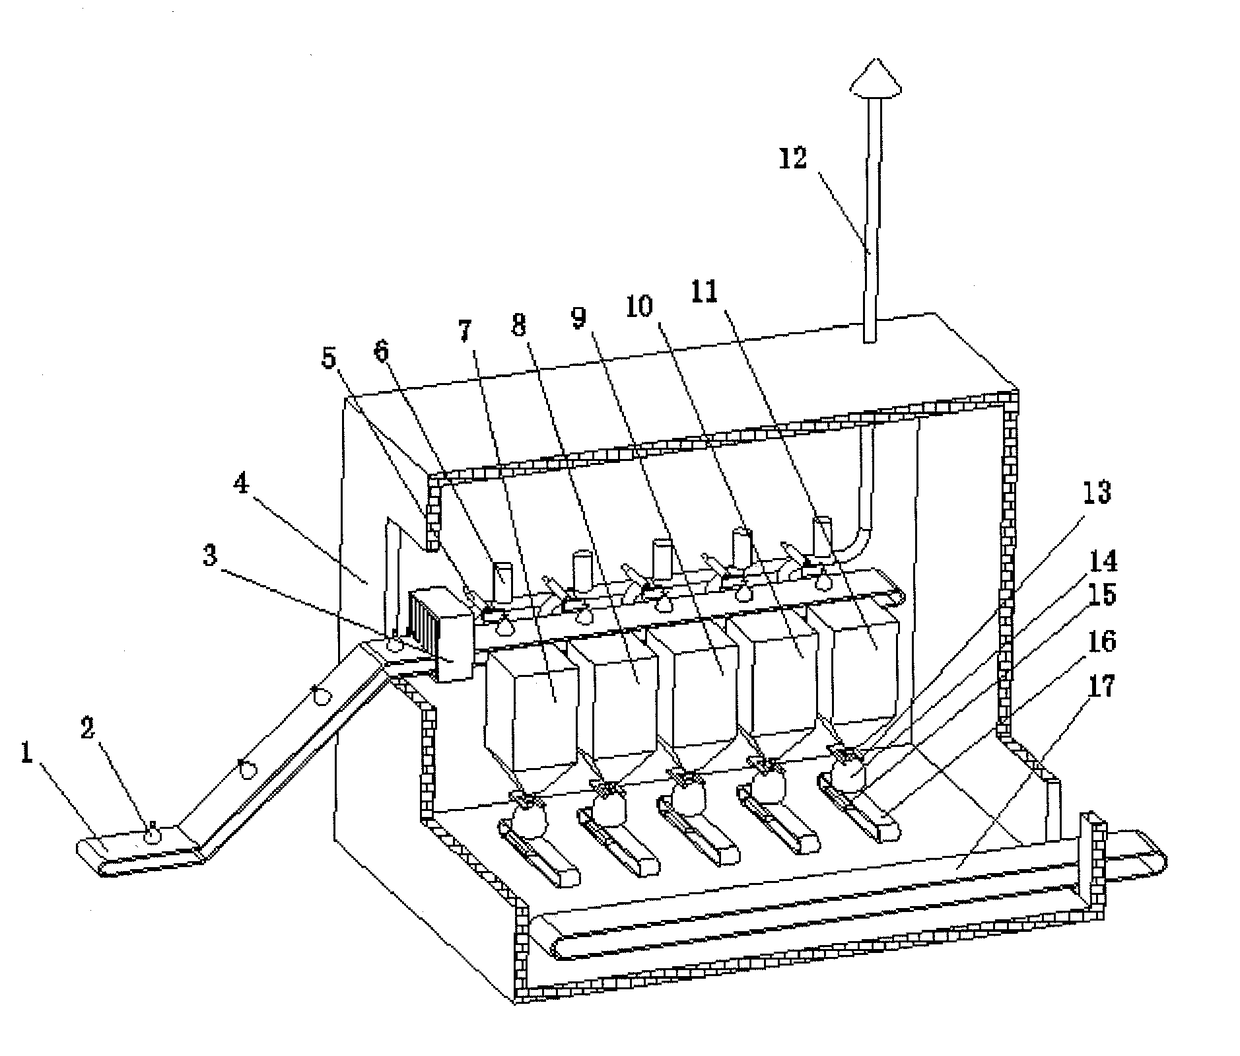 Environmentally-friendly medical waste treatment apparatus and method specific to medical institutions